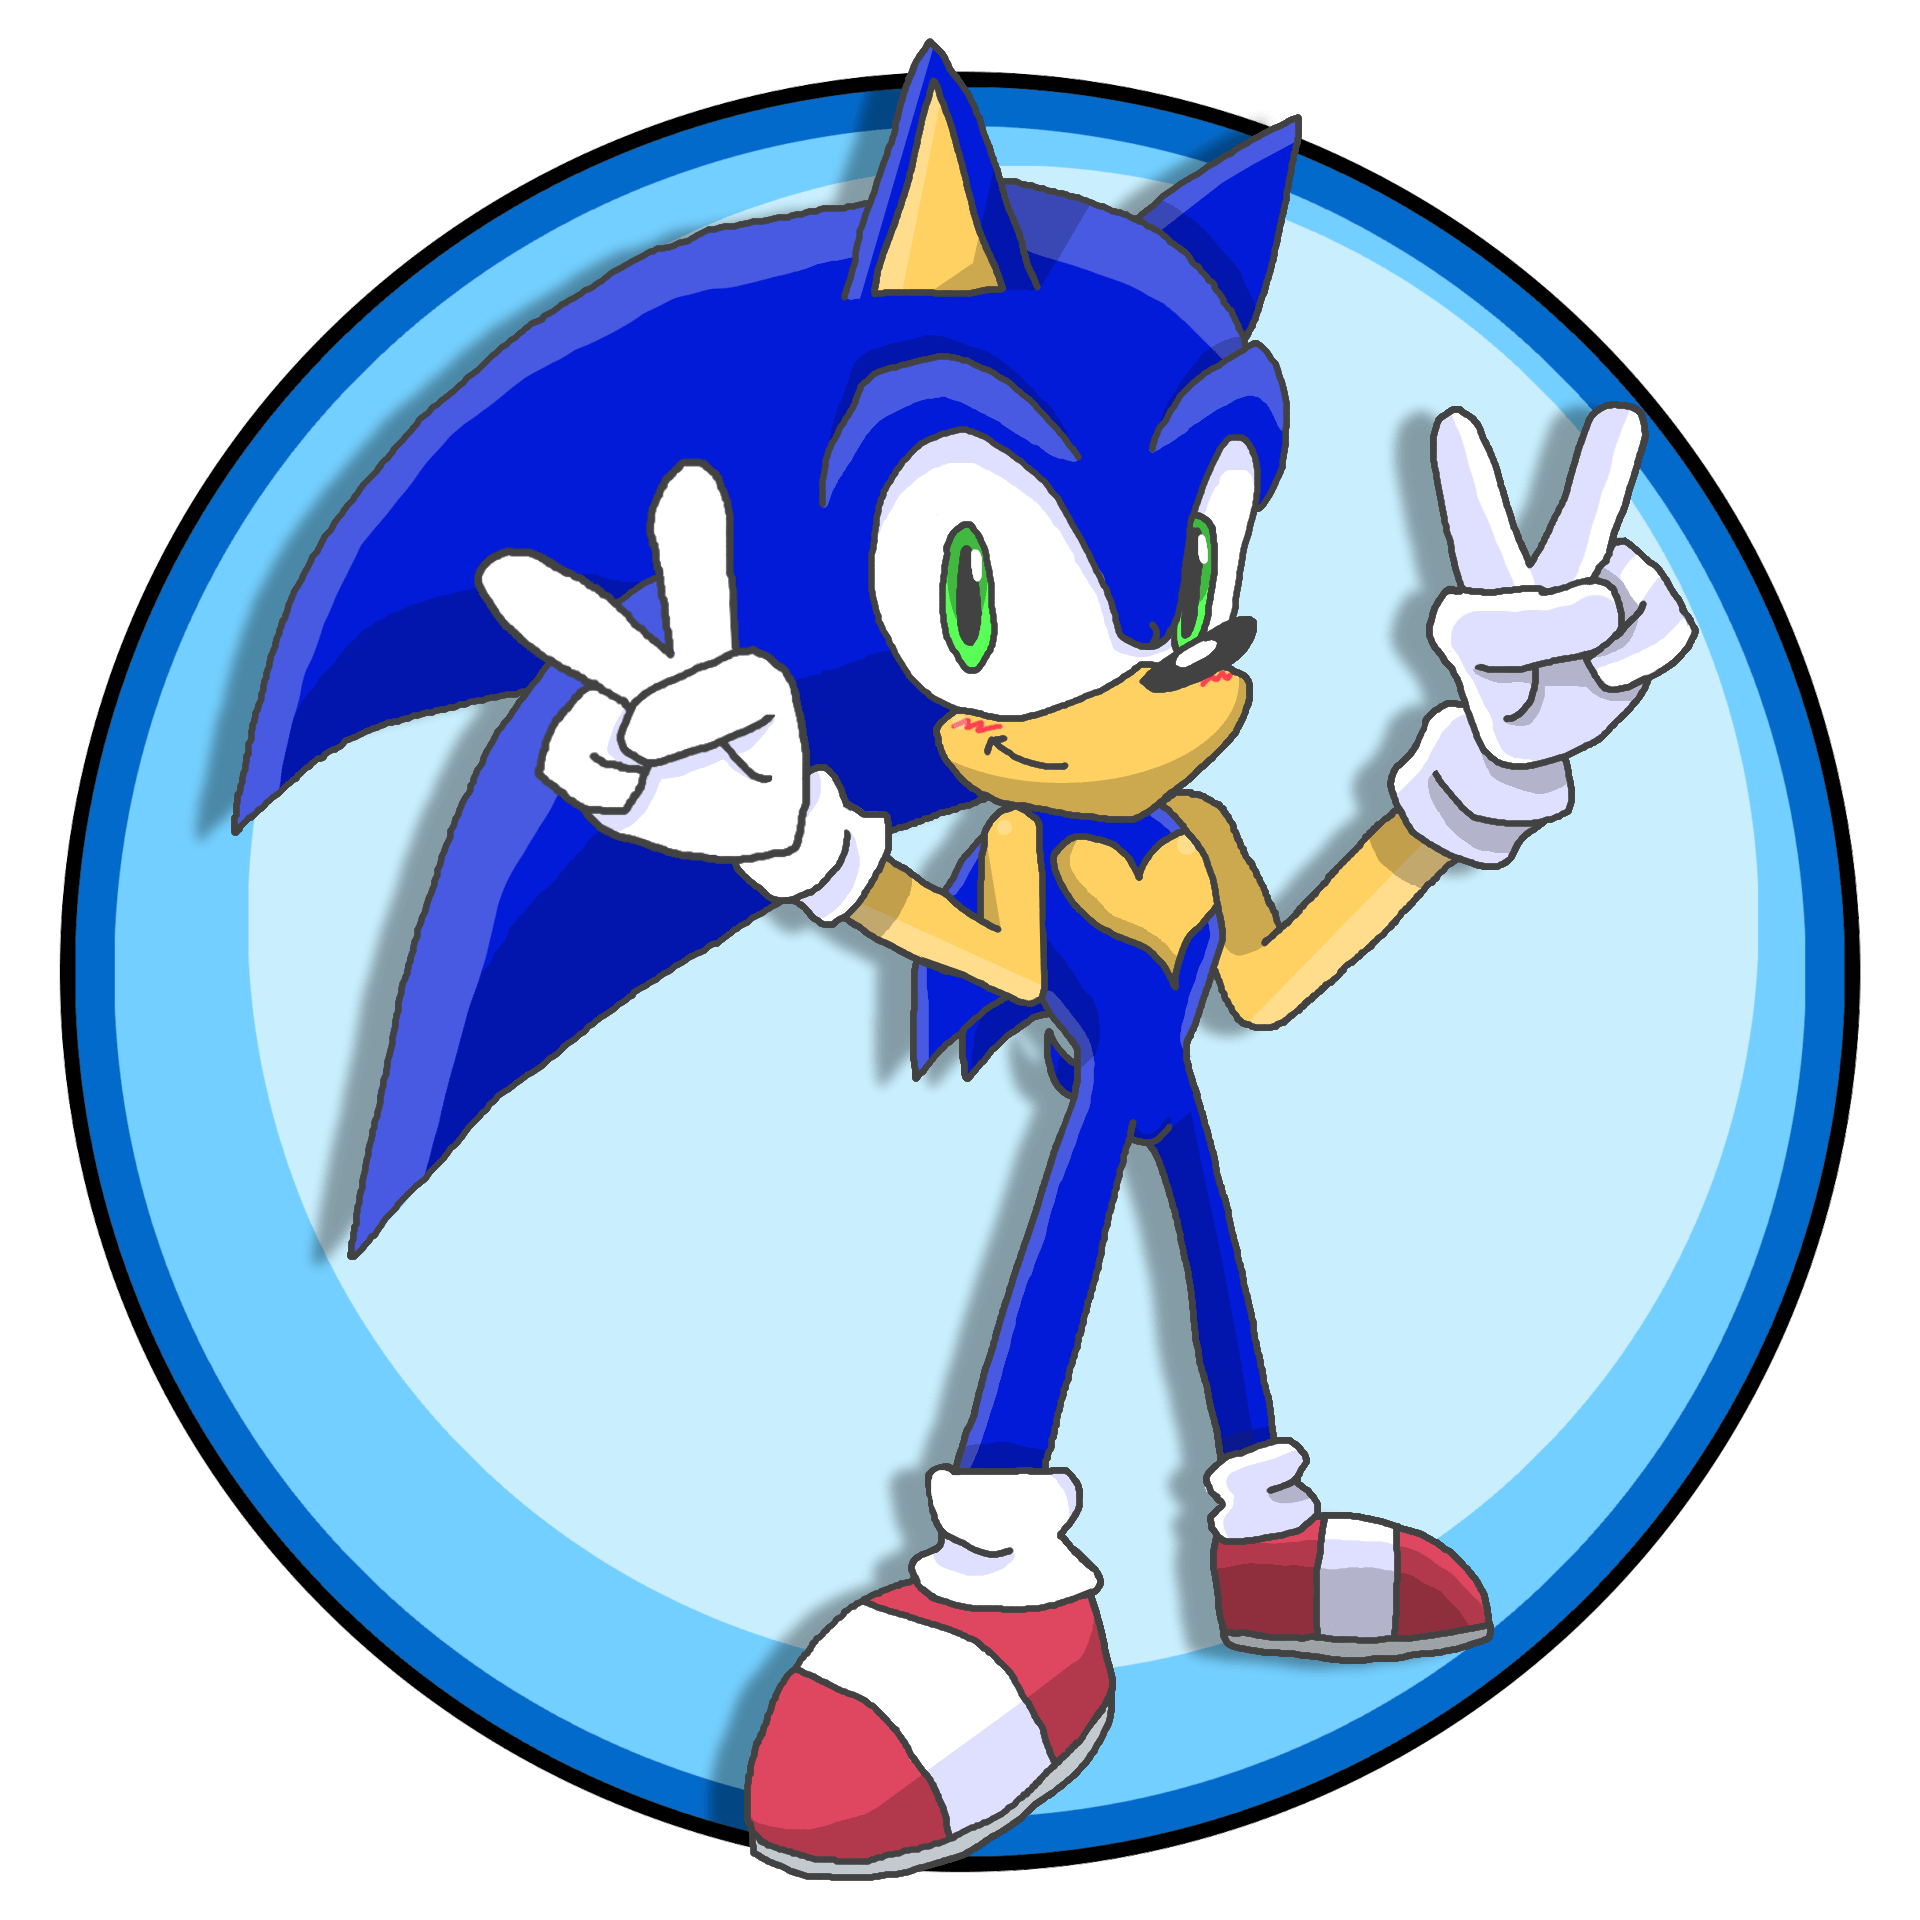 Sonic smiling and making peace signs with his hands. Click through to its dedicated webpage for a more detailed description.